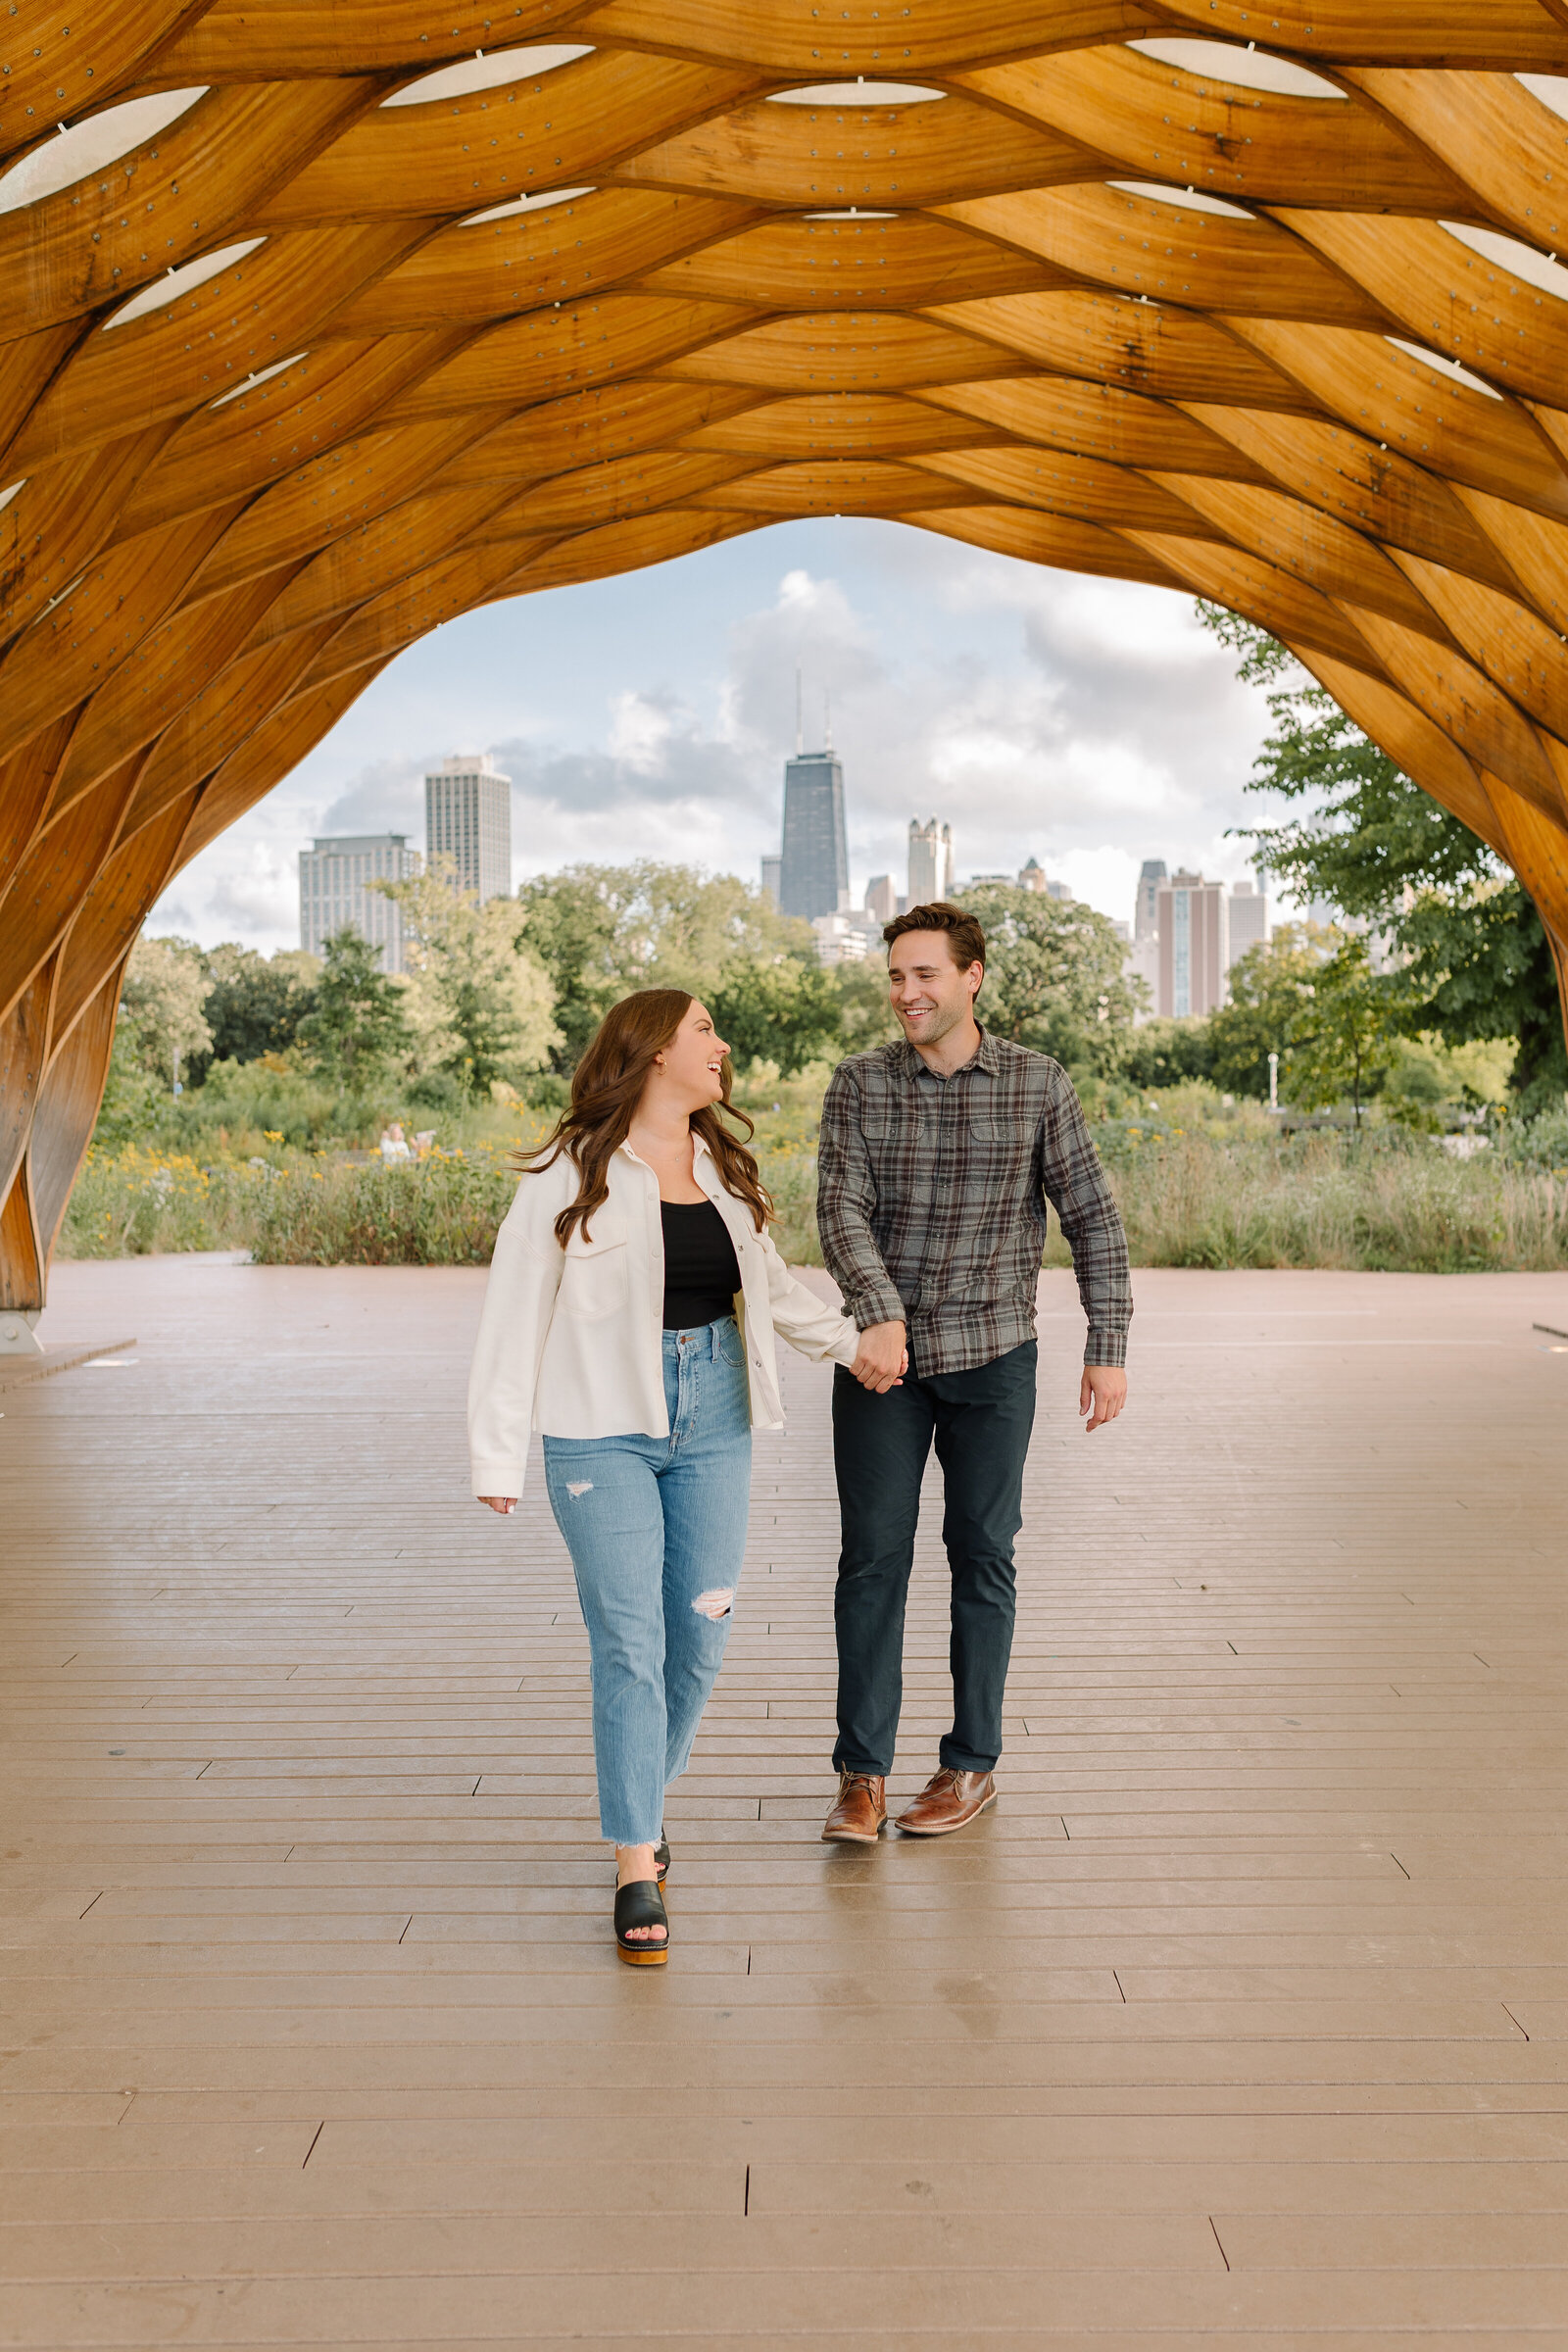 Young couple walking together while holding hands under the honeycomb sculpture in Chicago